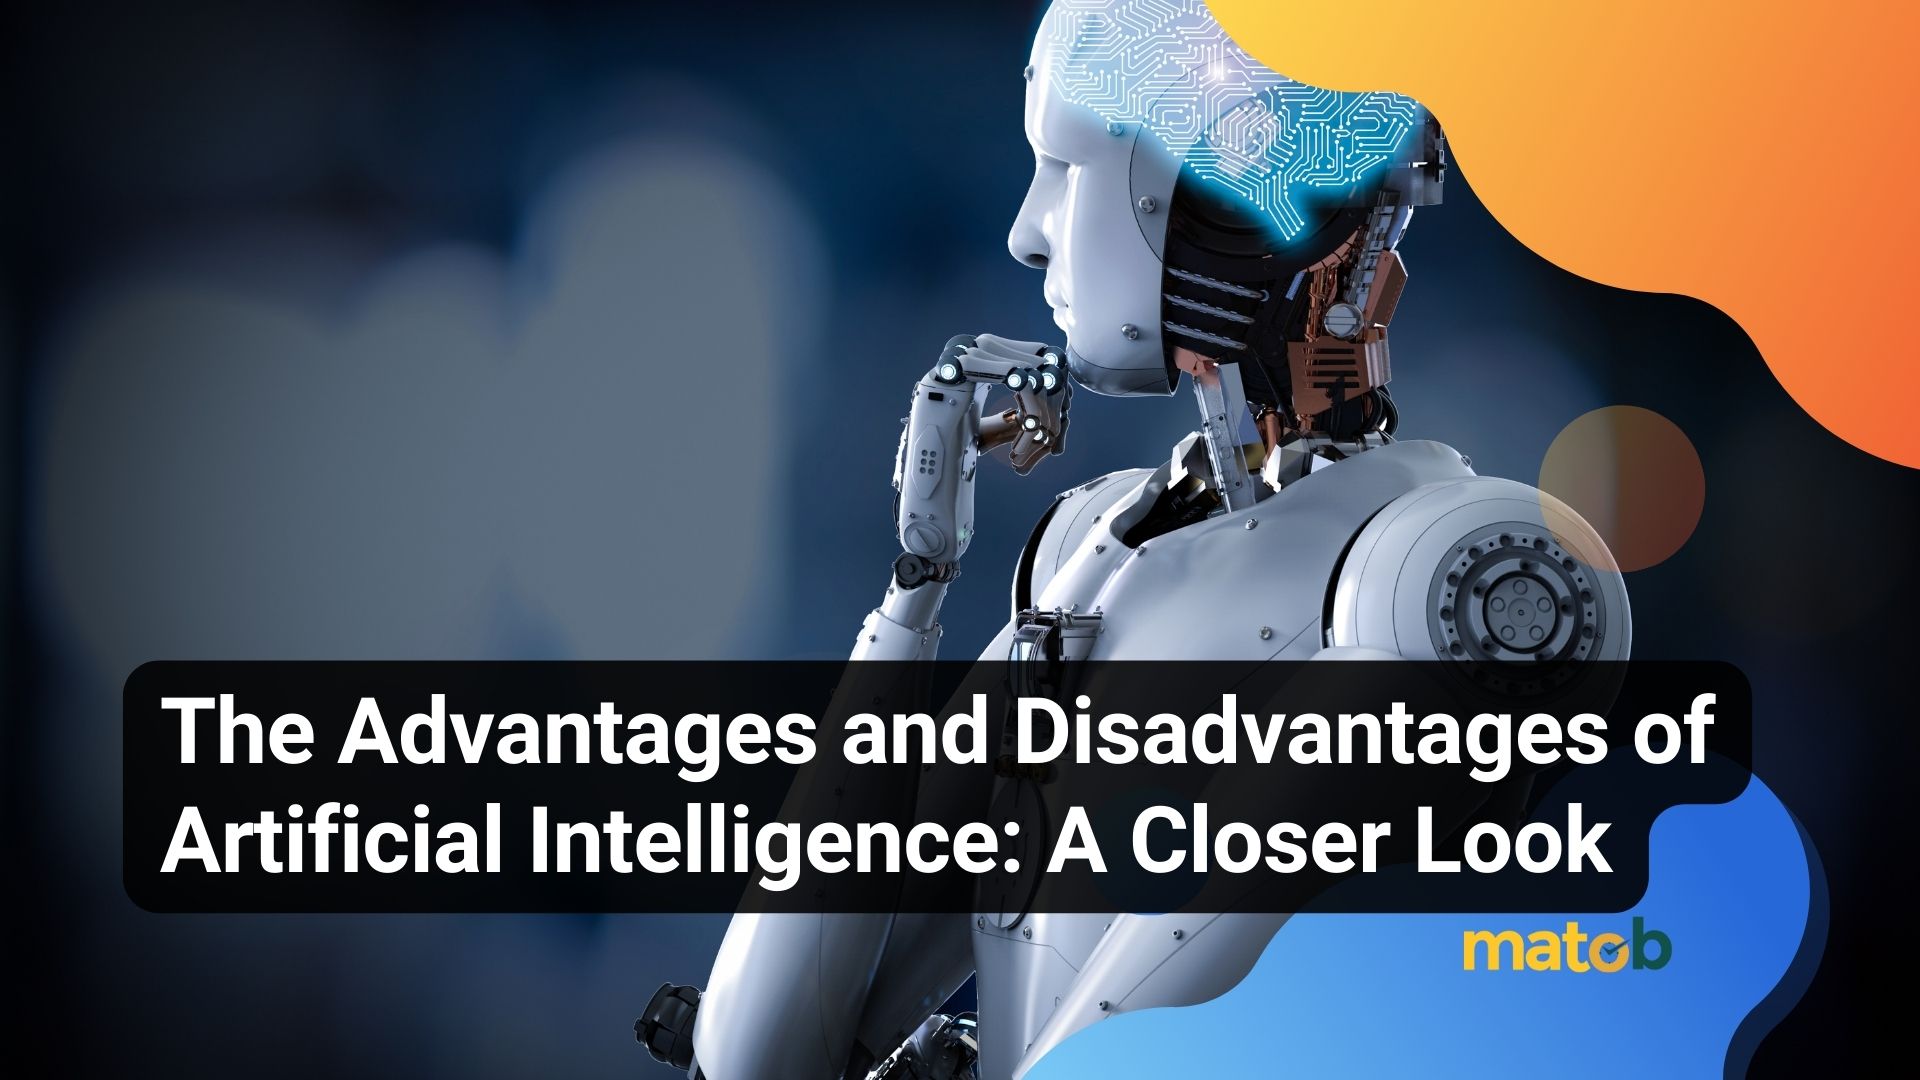 The Advantages and Disadvantages of Artificial Intelligence: A Closer Look